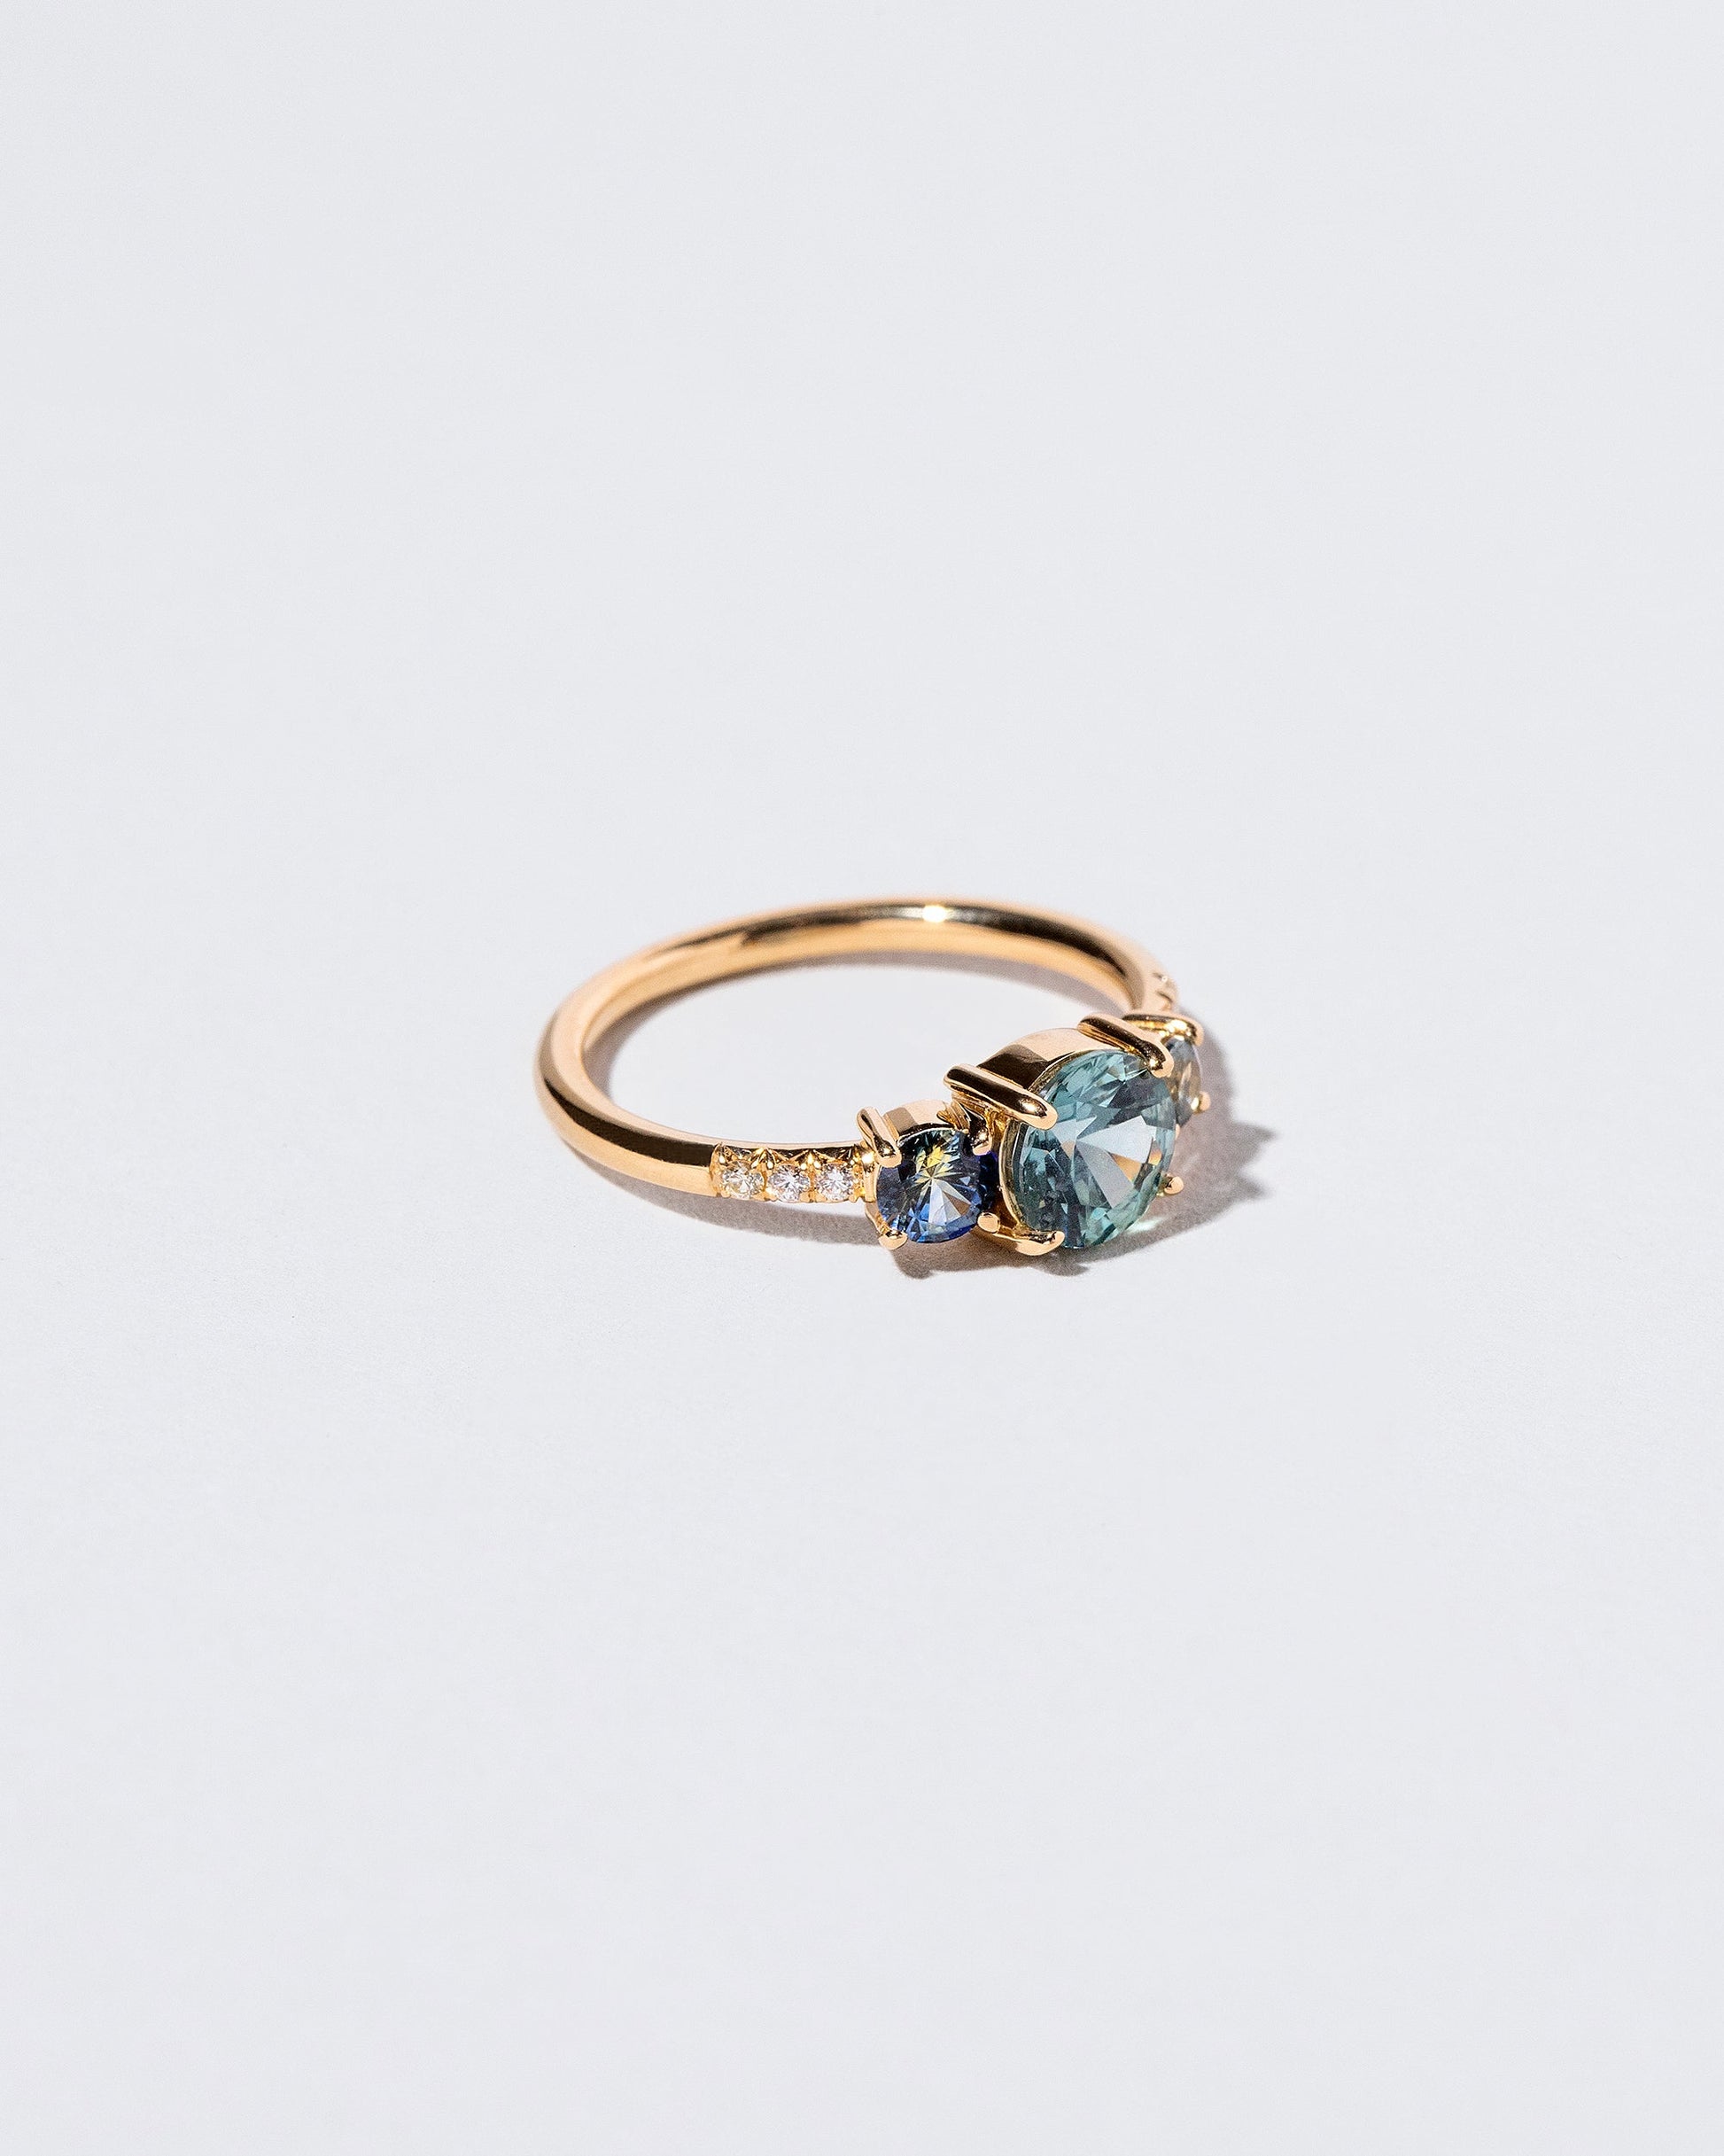  Orion Ring - Blue Sapphire on light color background.